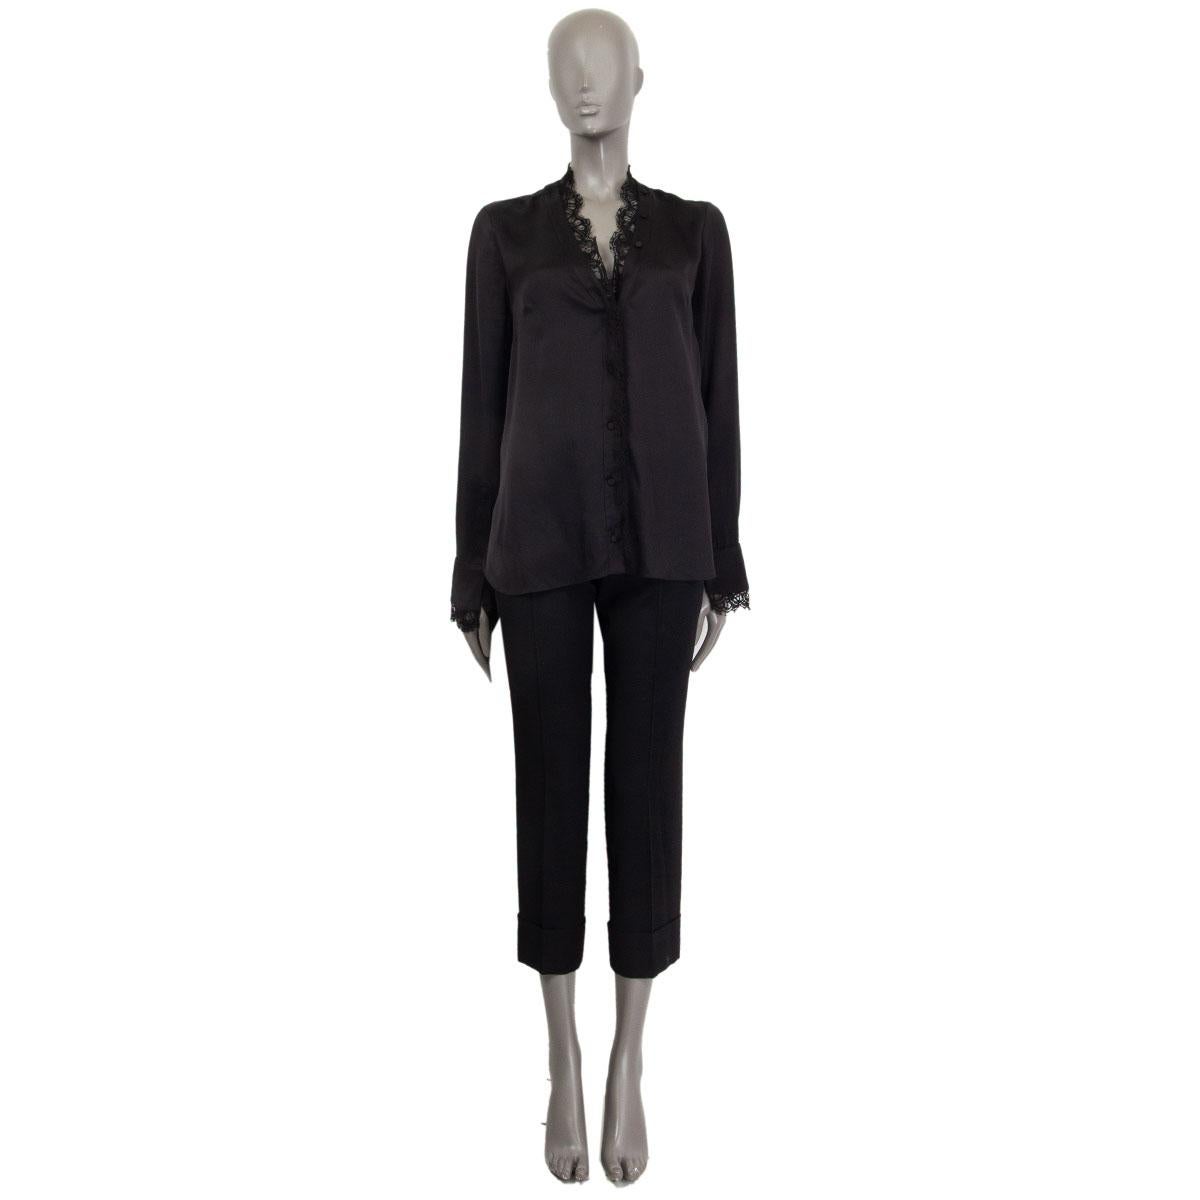 100% authentic Alexander McQueen lace trim blouse in black silk (100%), cotton (72%) and polyamide (28%) with v-neck and long sleeve. Closes with buttons on the front and has buttoned cuffs. Unlined. Has been worn and is in excellent